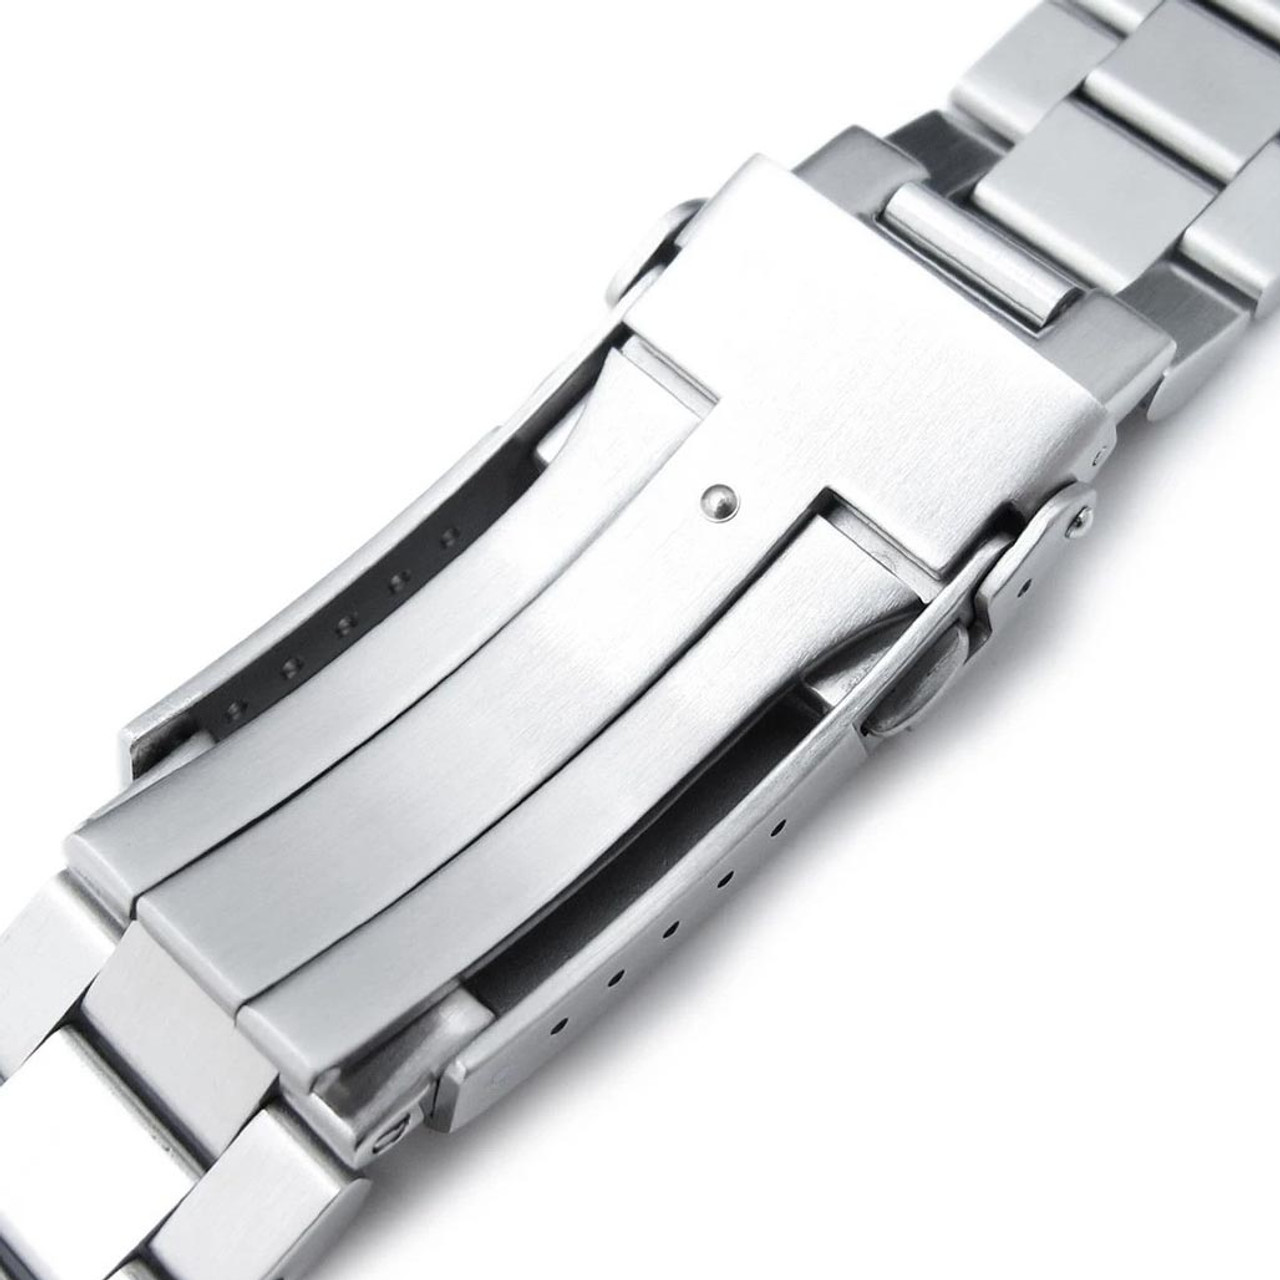 22mm oyster Solid Link stainless steel bracelet For seiko prospex